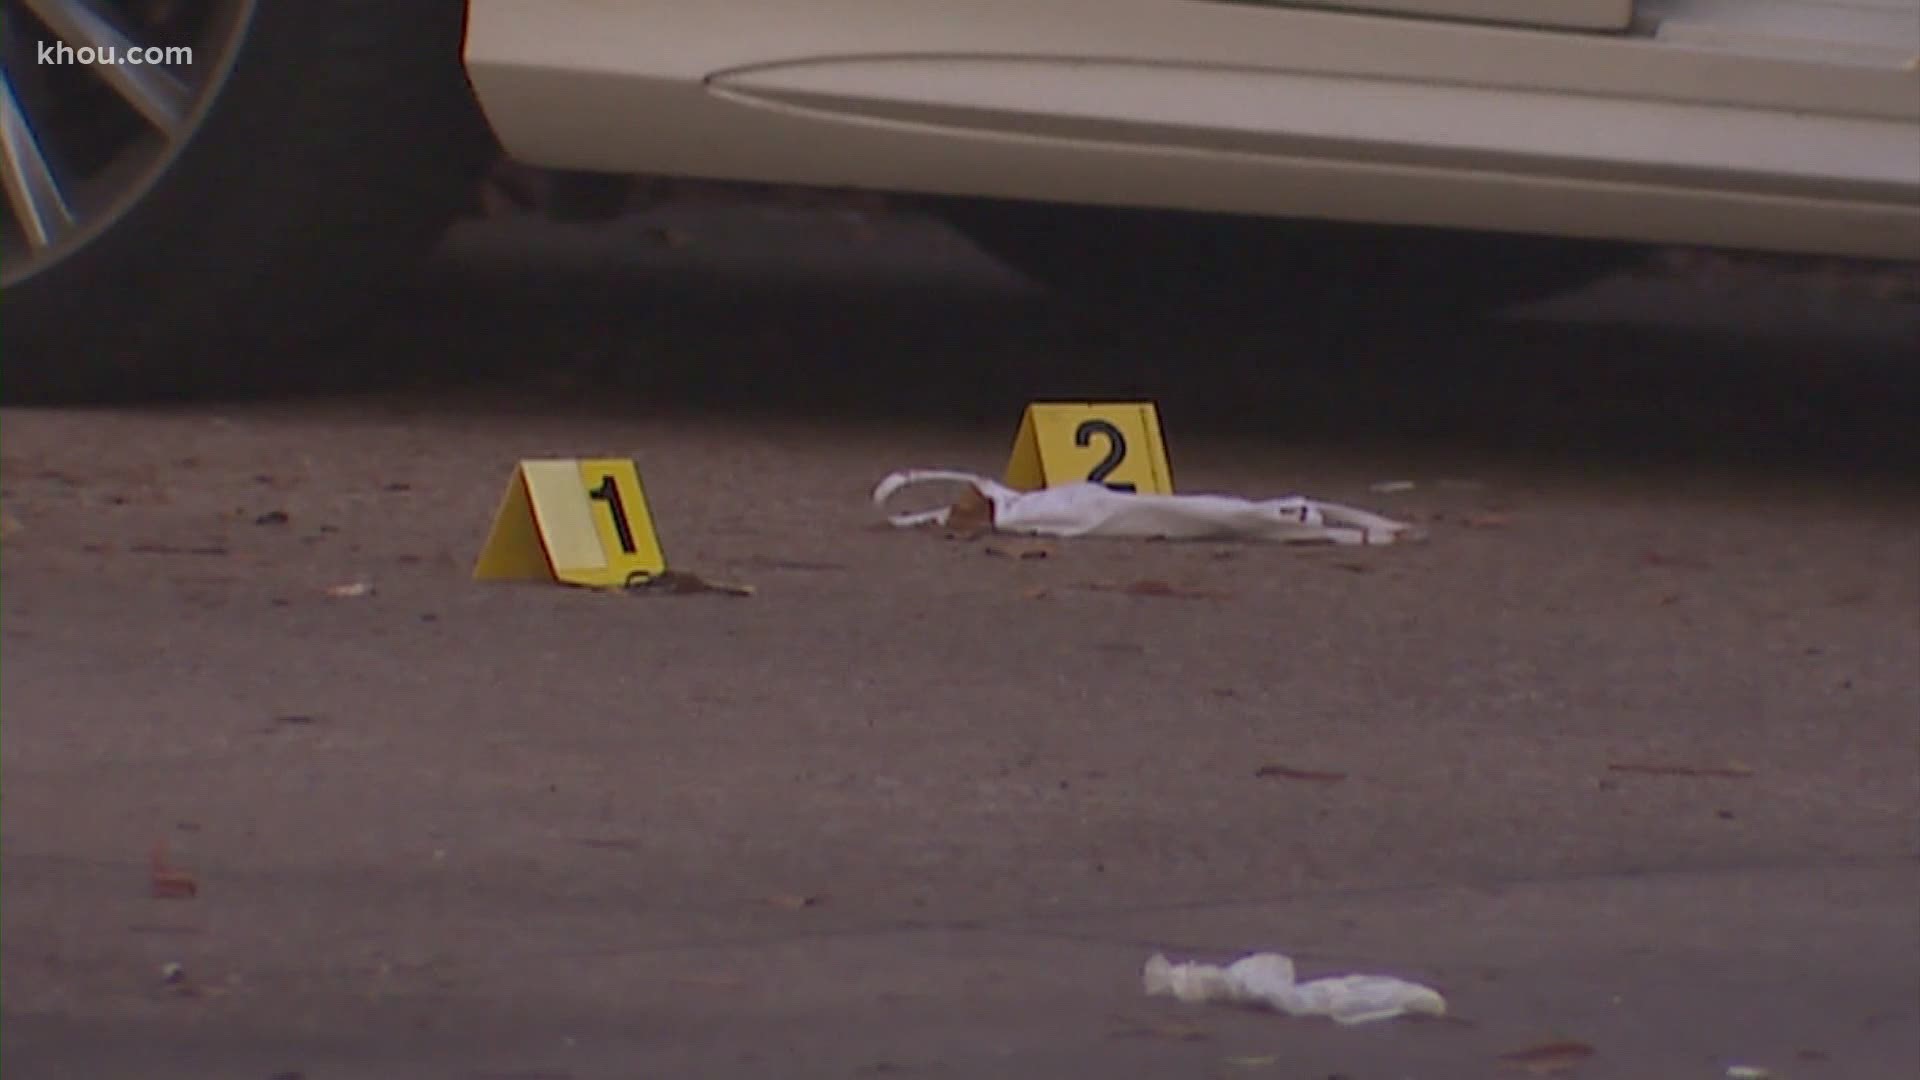 One teen was killed and two other juveniles were injured in a series of shootings in Houston on Monday.